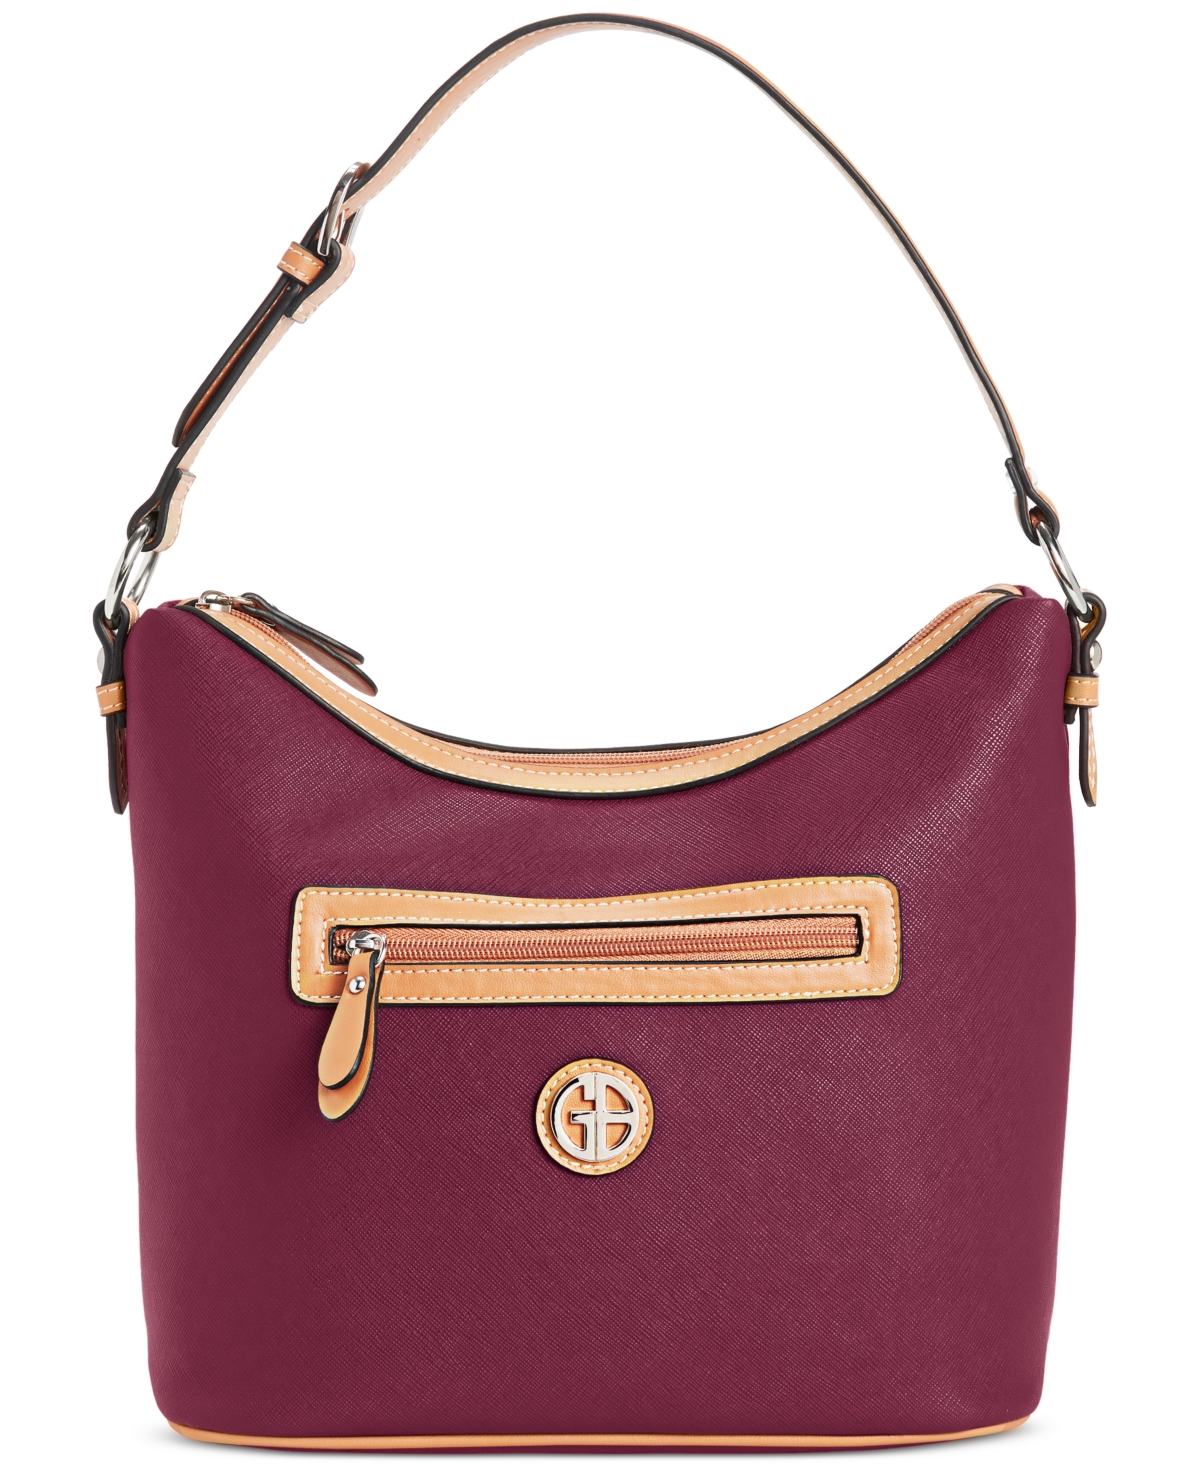 Saffiano Faux Leather Medium Hobo Bag, Created for Macy's - Beet